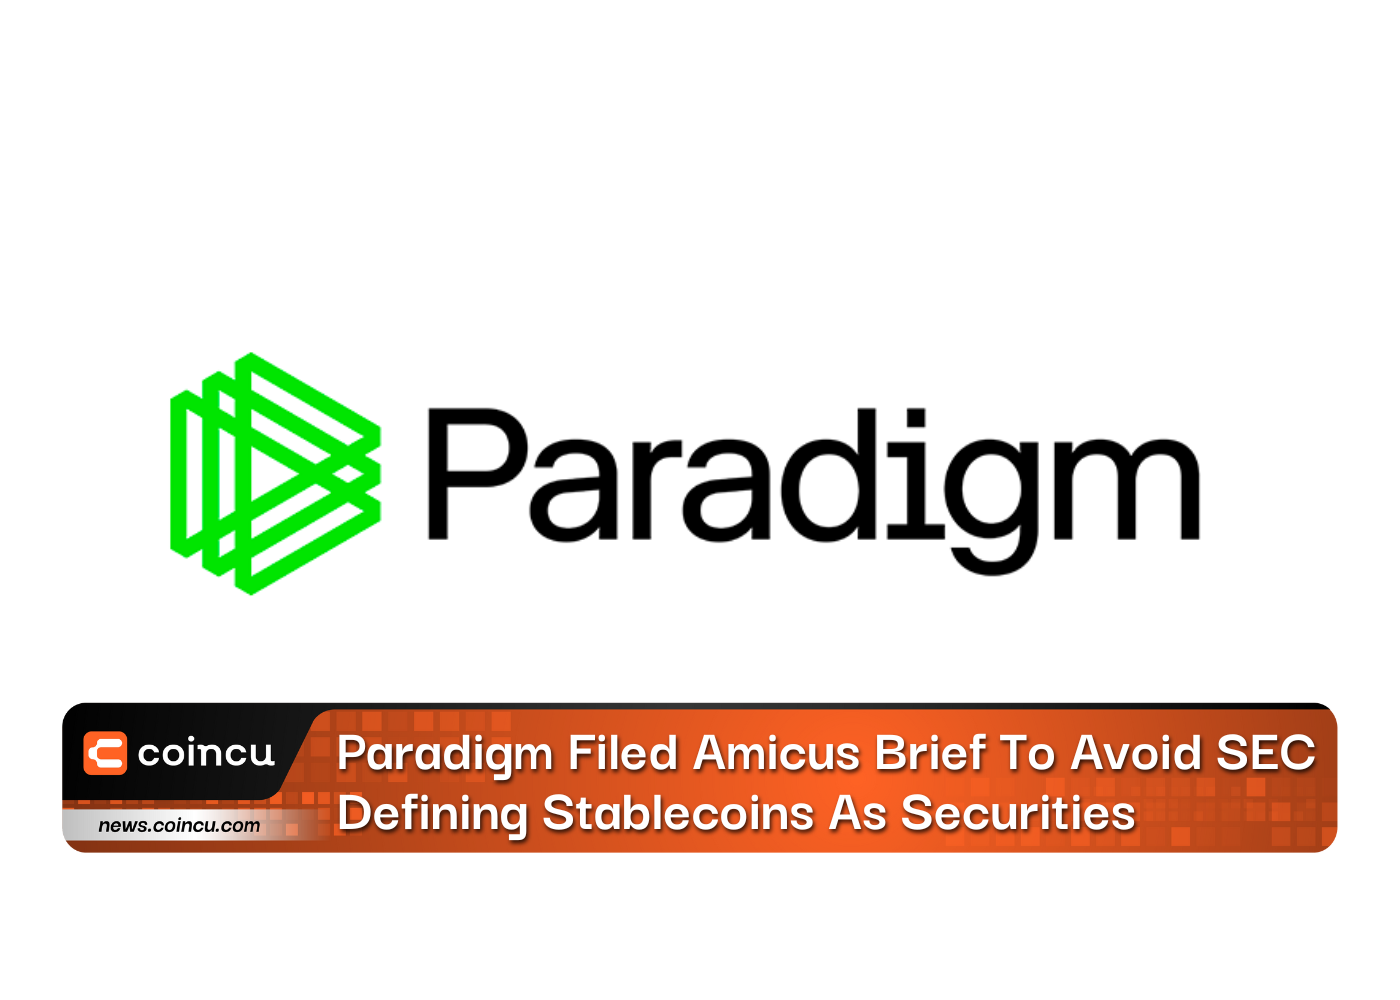 Paradigm Filed Amicus Brief To Avoid SEC Defining Stablecoins As Securities